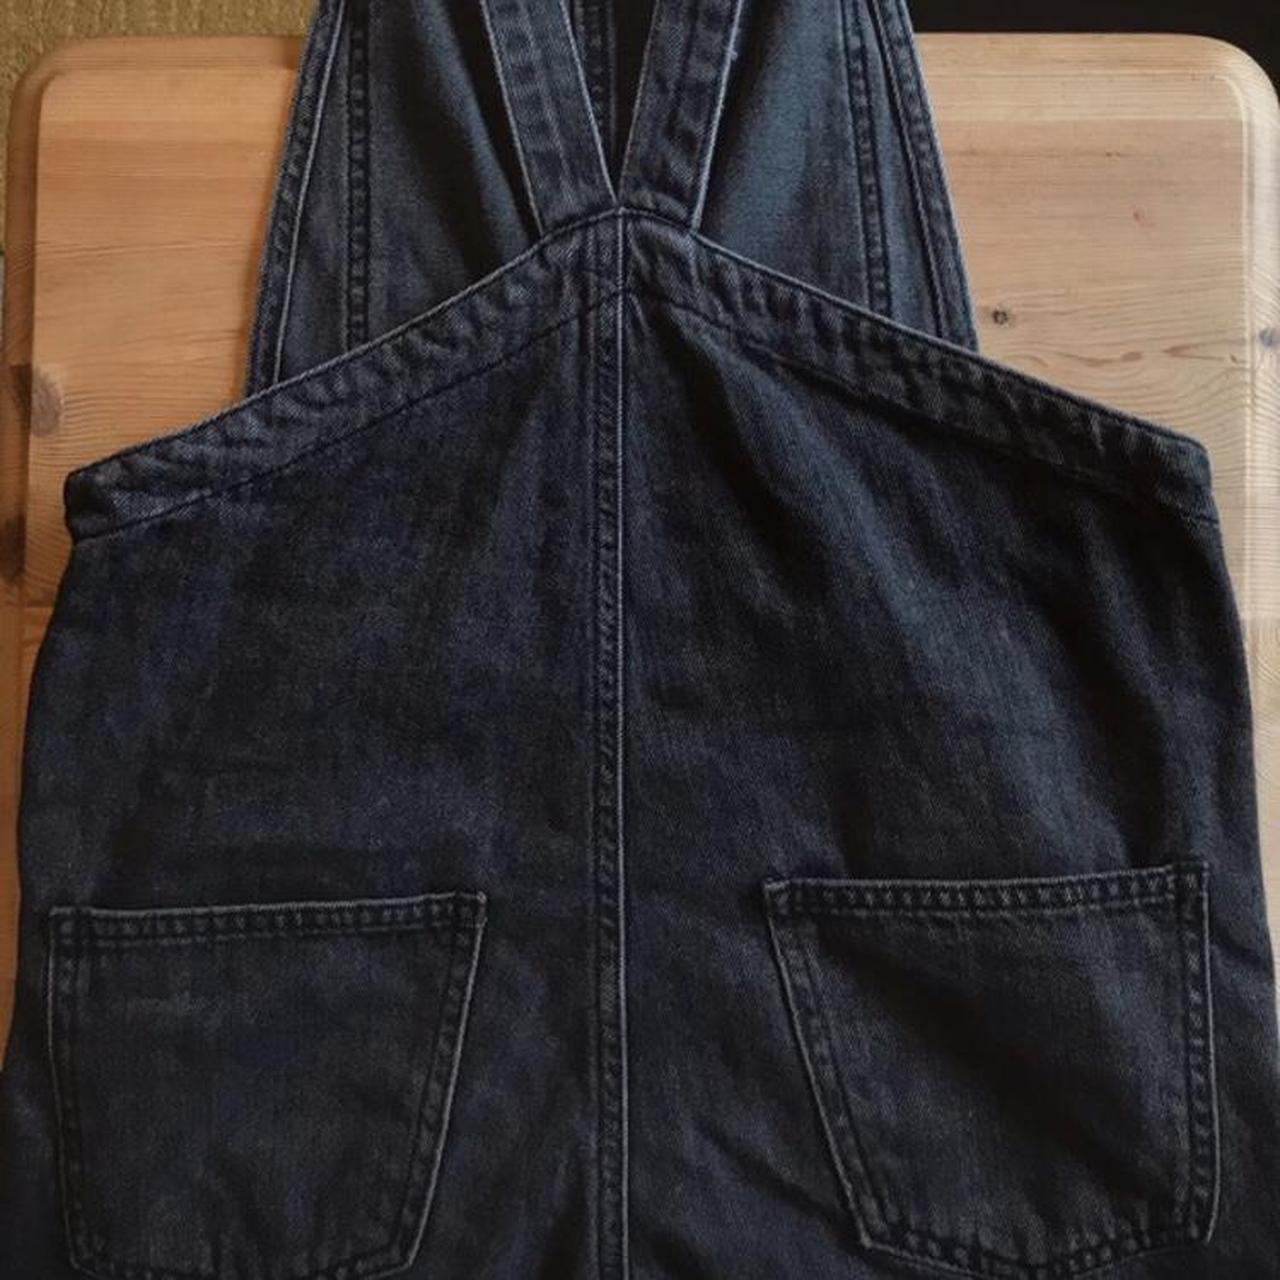 Product Image 4 - Faded, black top shop dungarees